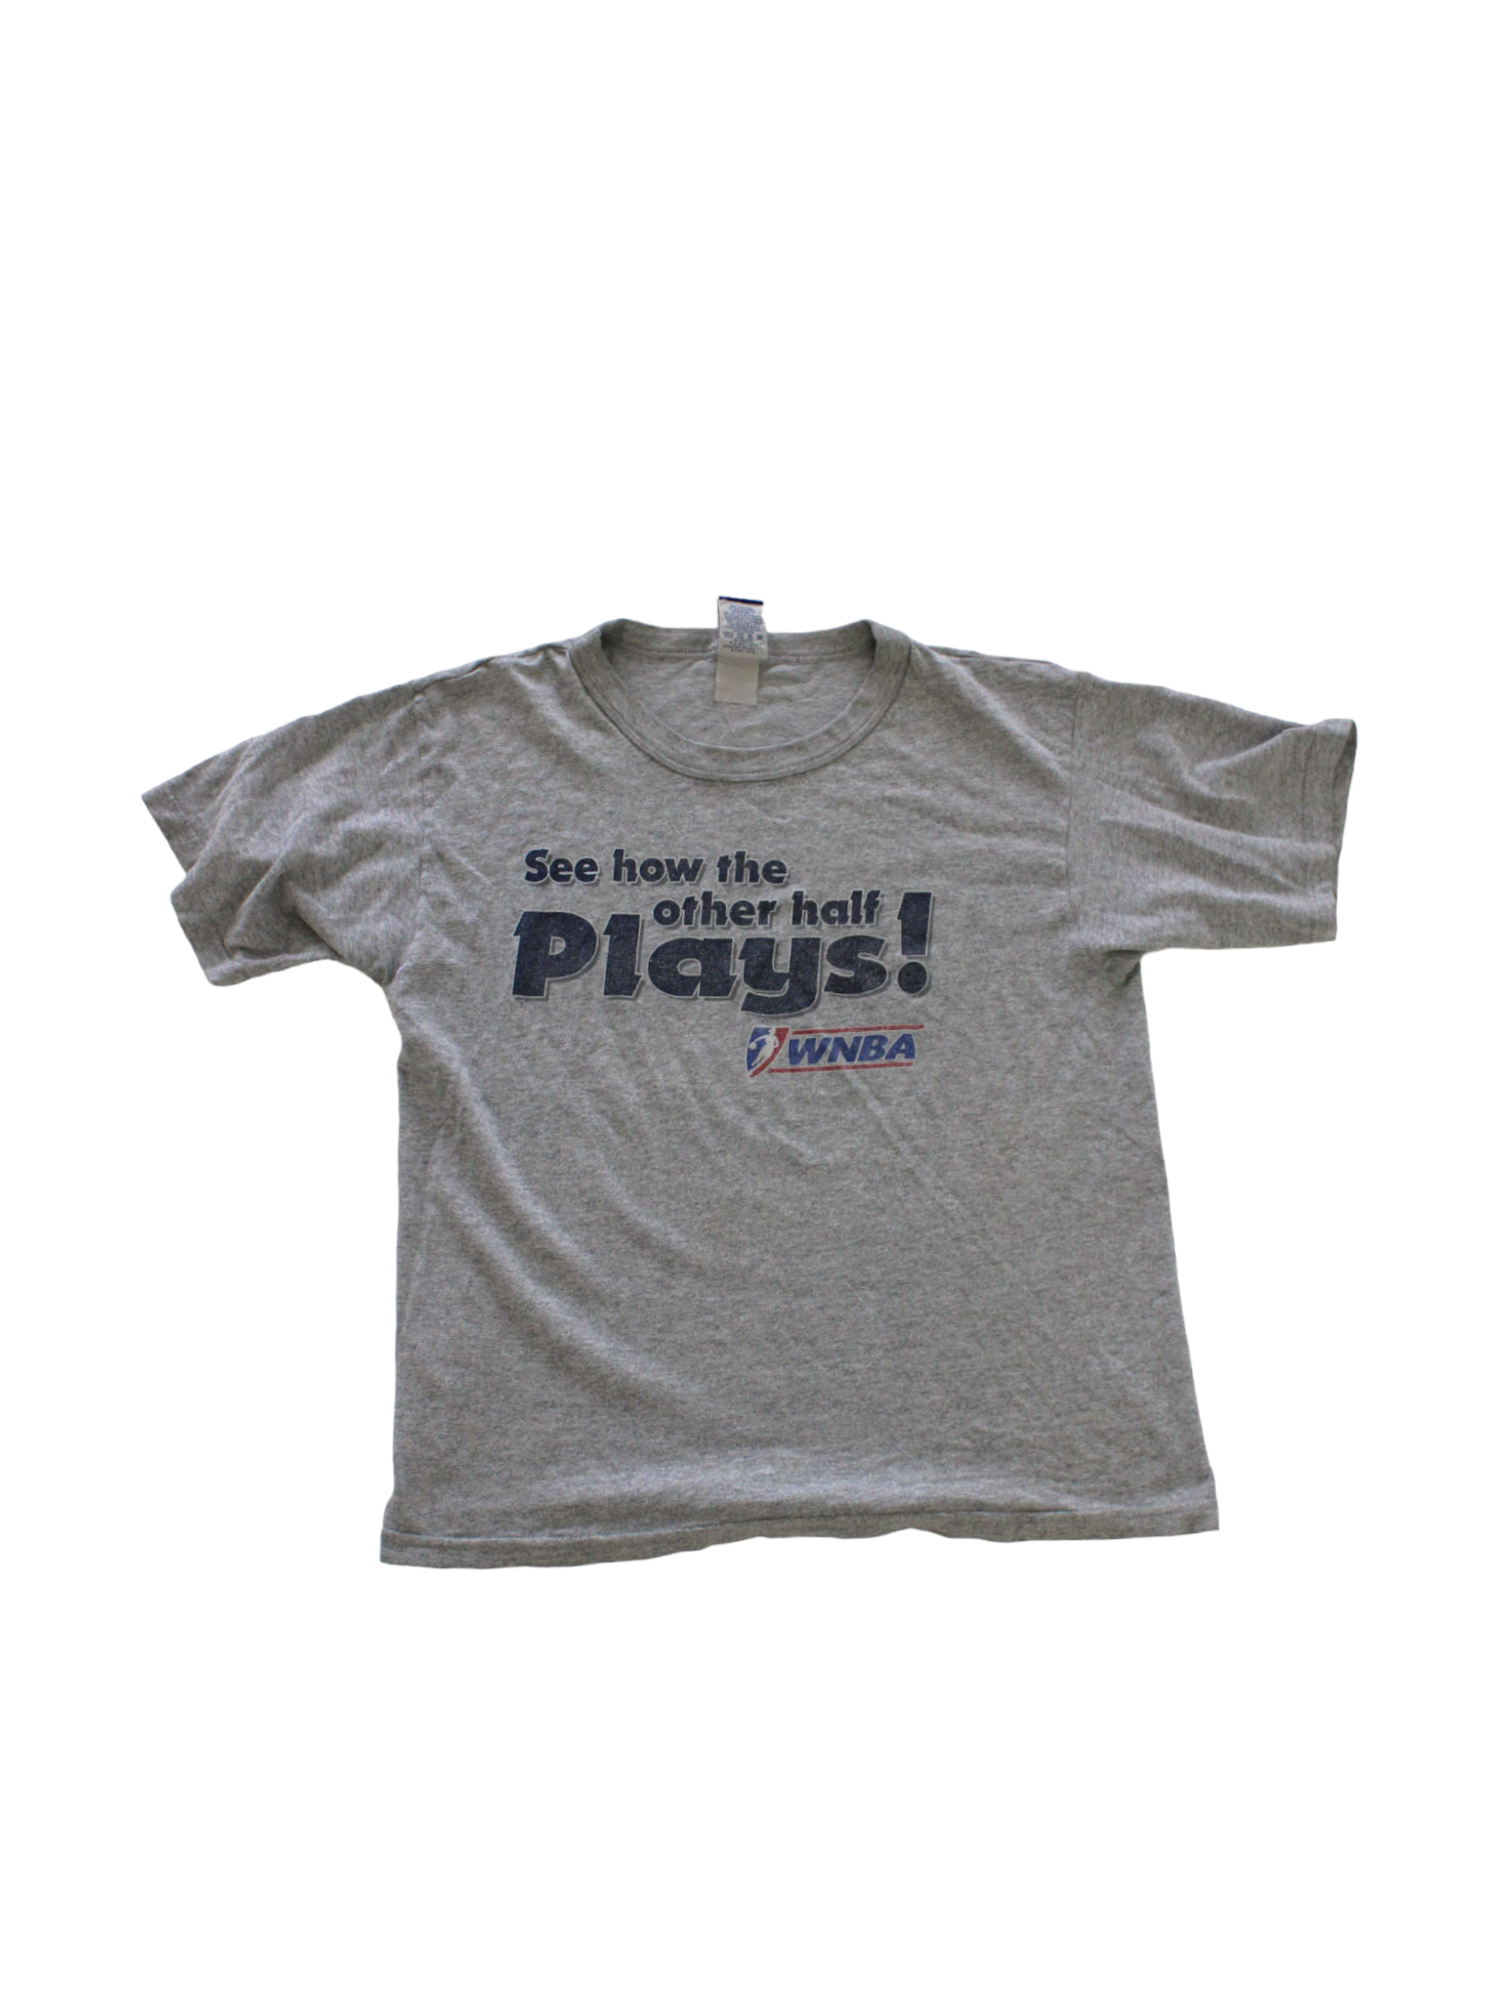 Vintage 90s WNBA "See how the other half Plays!" Single-stitch Tee